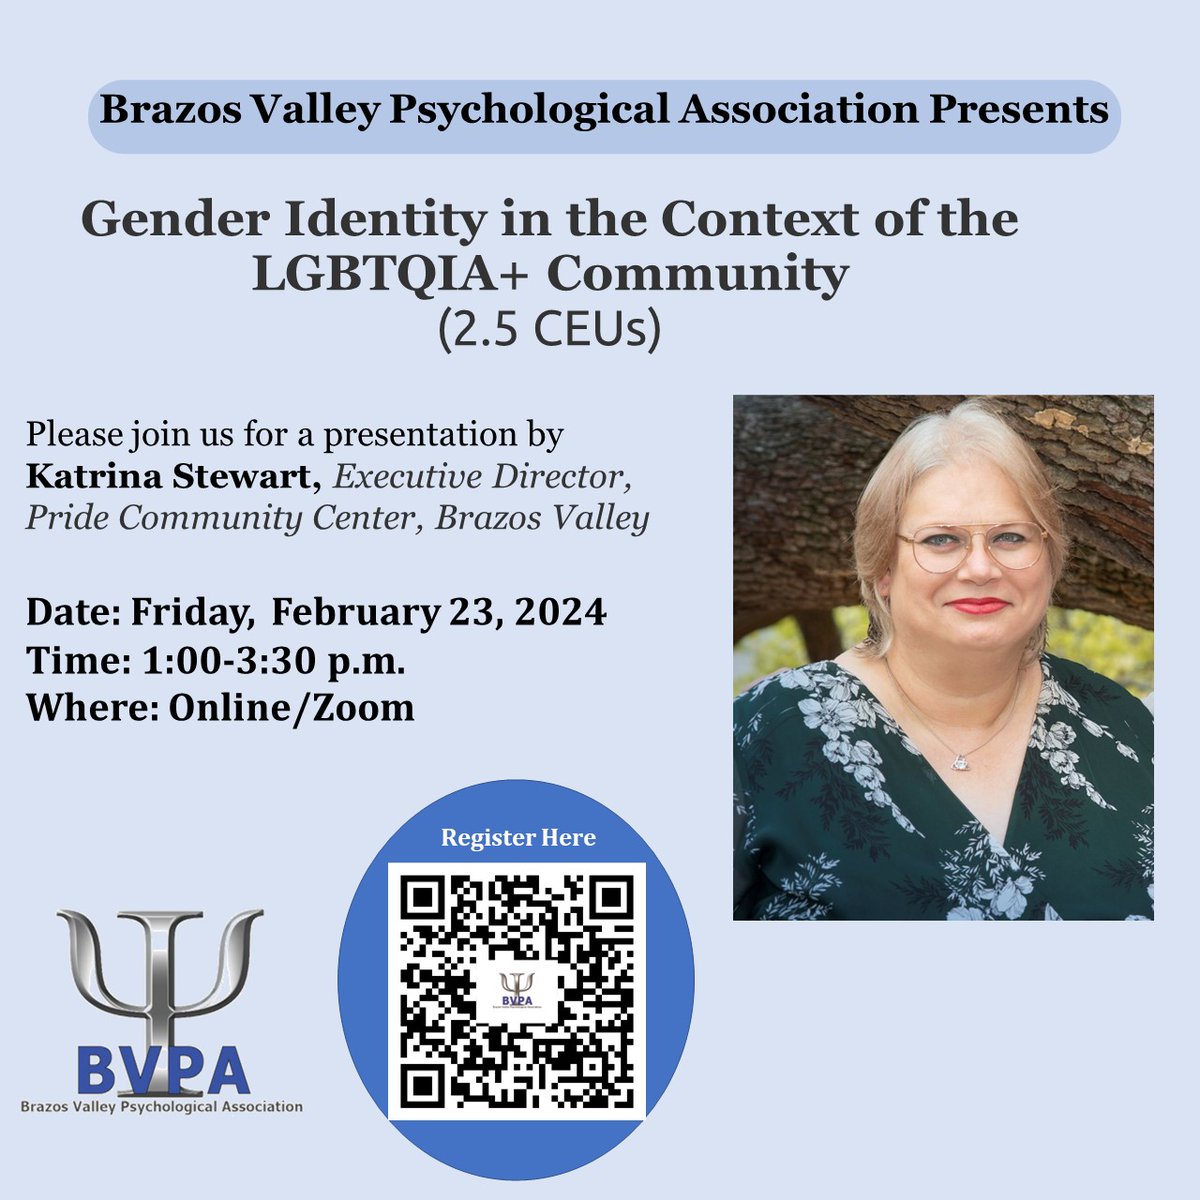 Learn about #resources #tools  #knowledge to help #practitioners to better understand and engage with the #LGBTQIA population. #BVPA #TPA #APA #TAMFT #AAMFT #mentalhealth #gay #transgender #lesbian #bisexual #intersex #queerquestioning #asexual #lpc #phd #lmft #lcsw #continueded